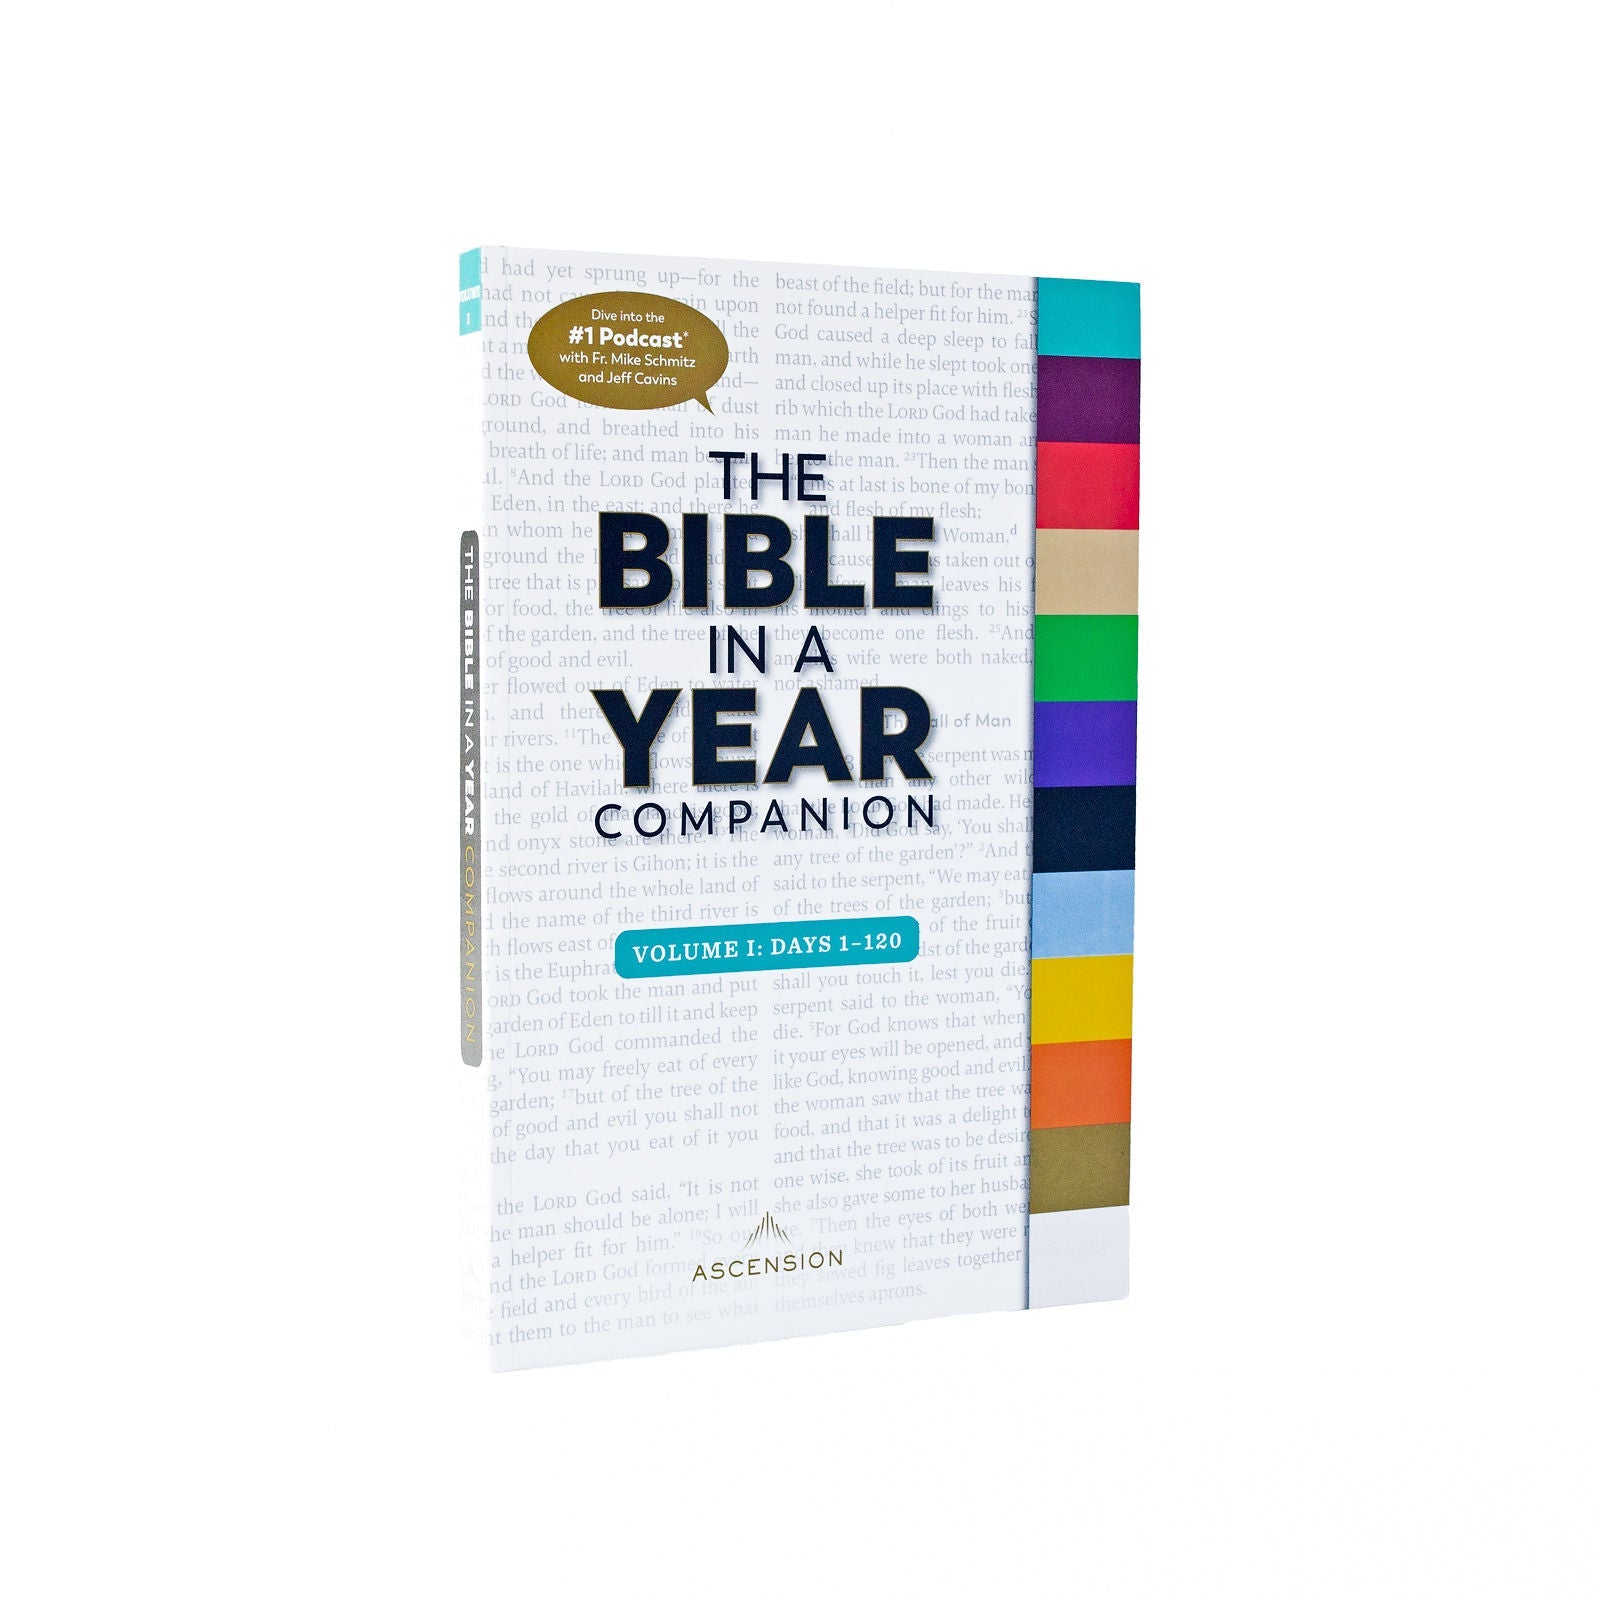 The Bible in a Year Companion Volume I